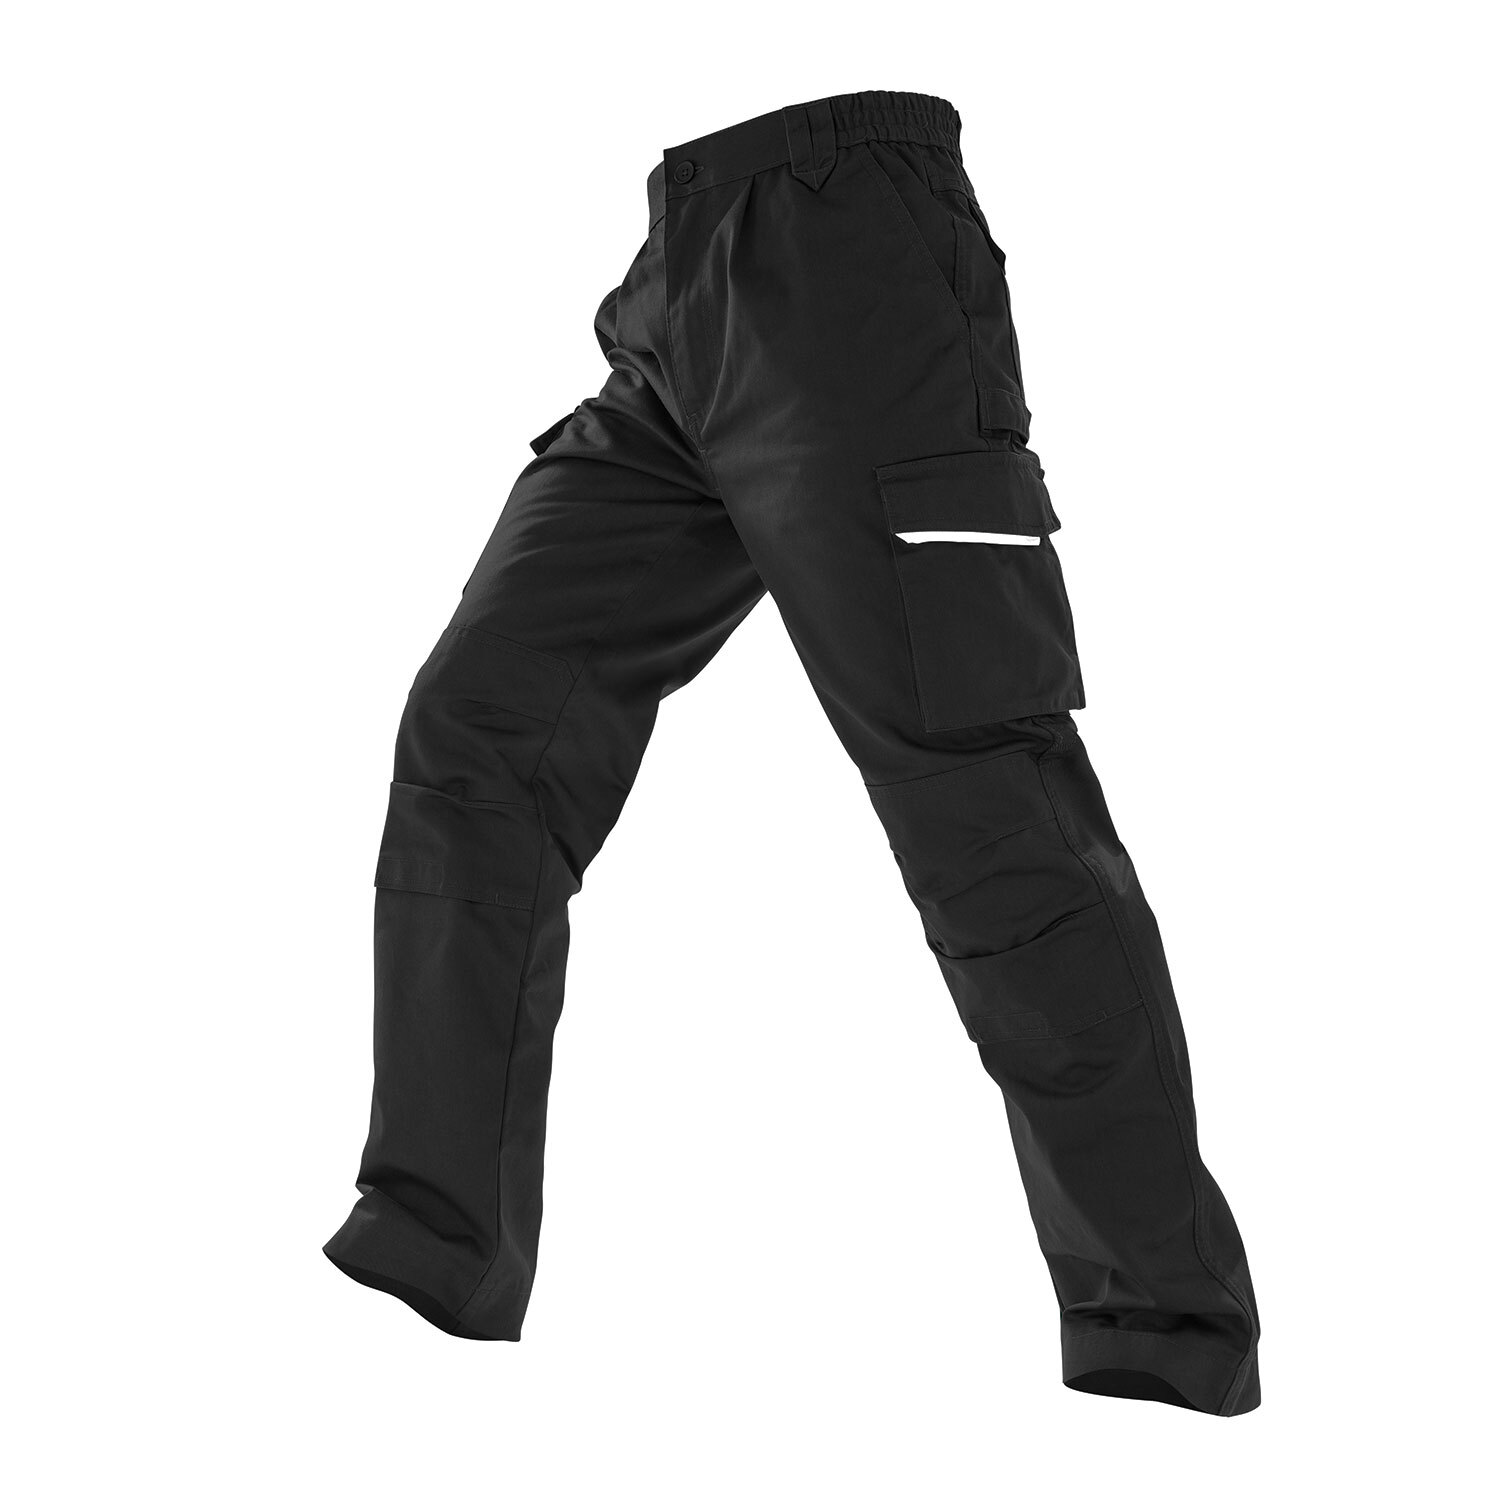 Work-Guard Black 36R Result Action Trousers Image 1